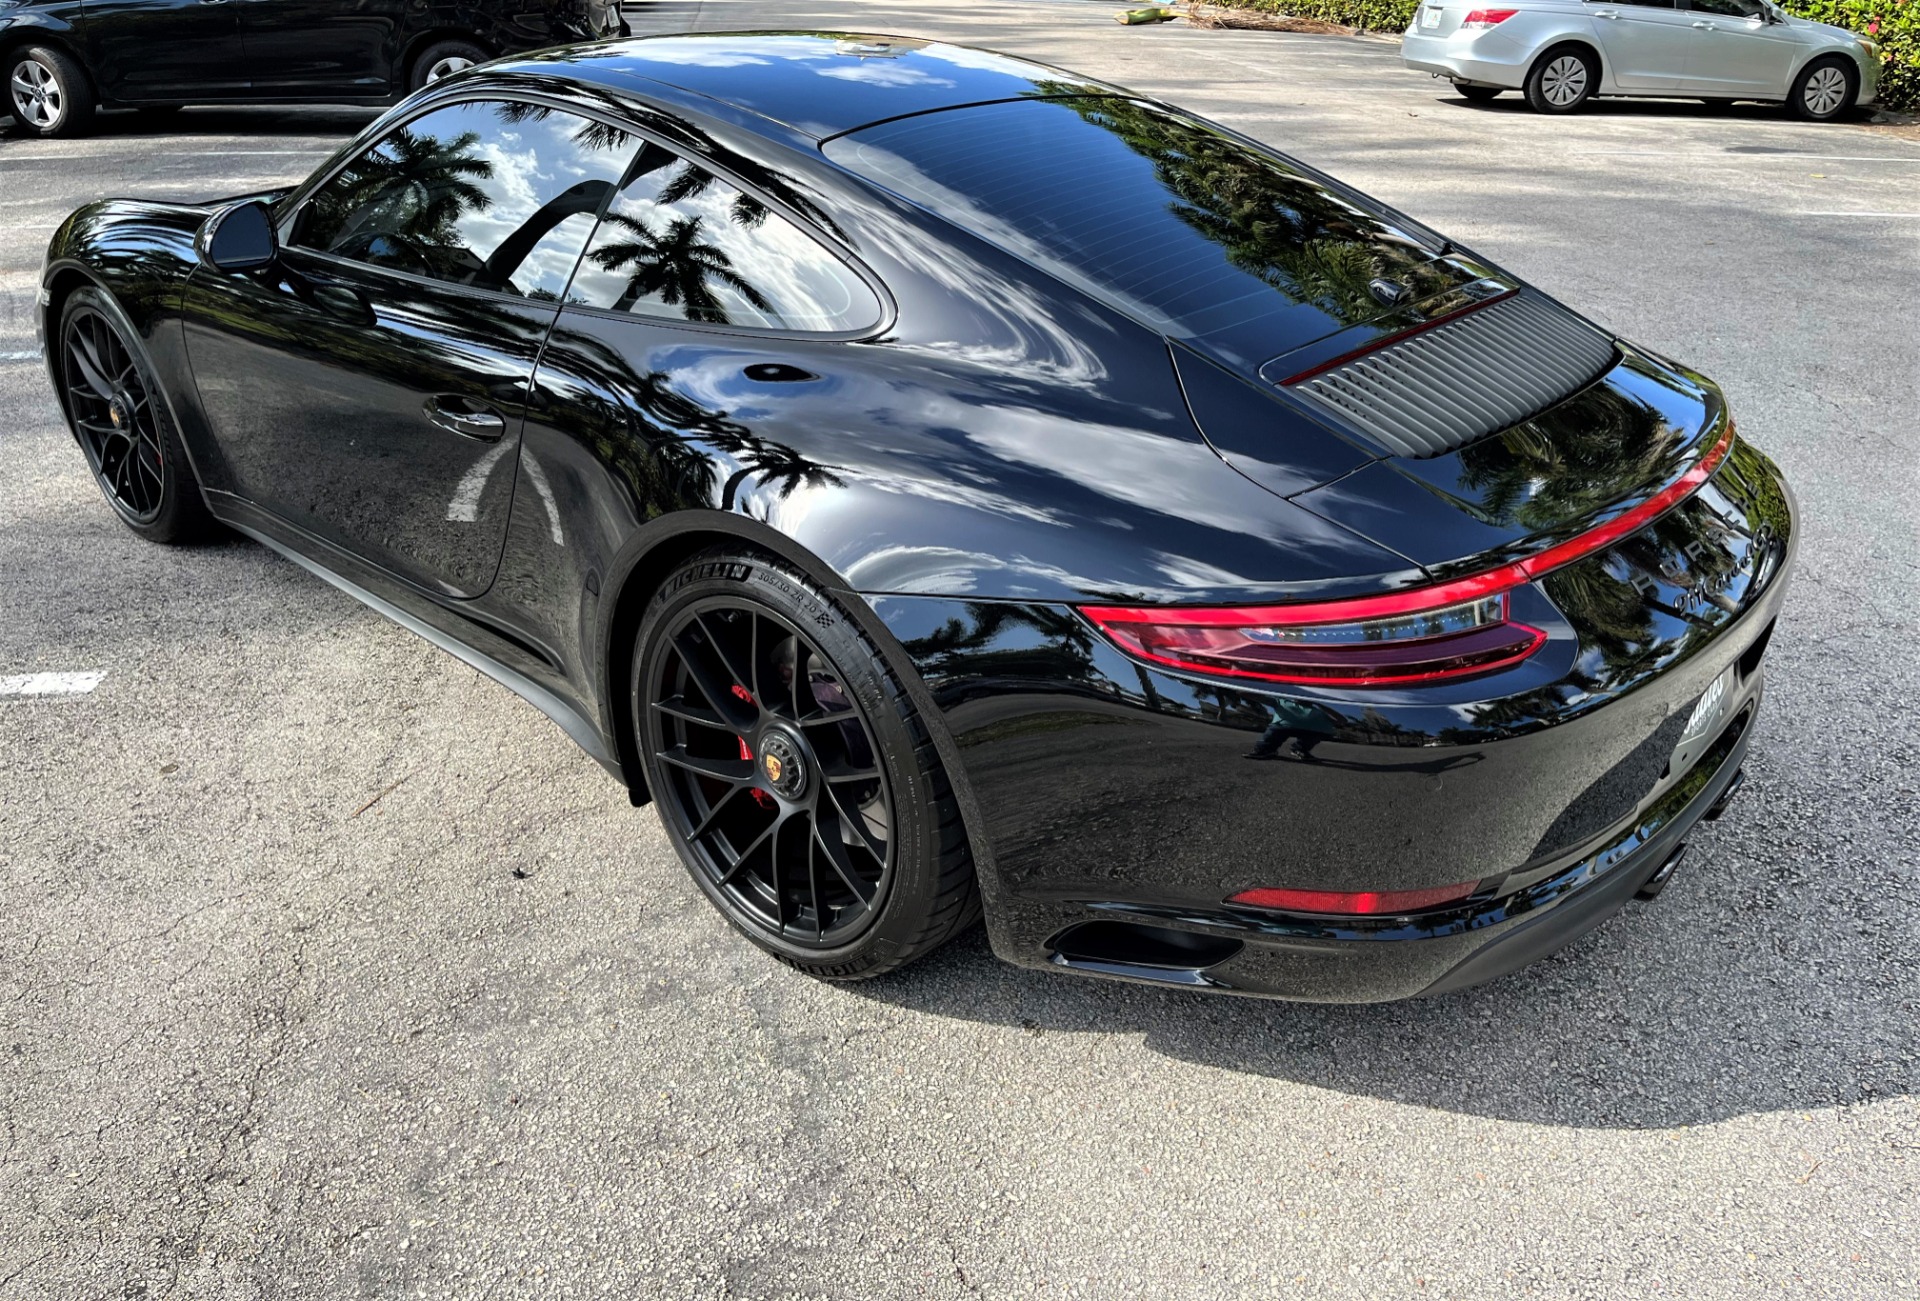 Used 2018 Porsche 911 Carrera 4 GTS for sale $146,850 at The Gables Sports Cars in Miami FL 33146 3